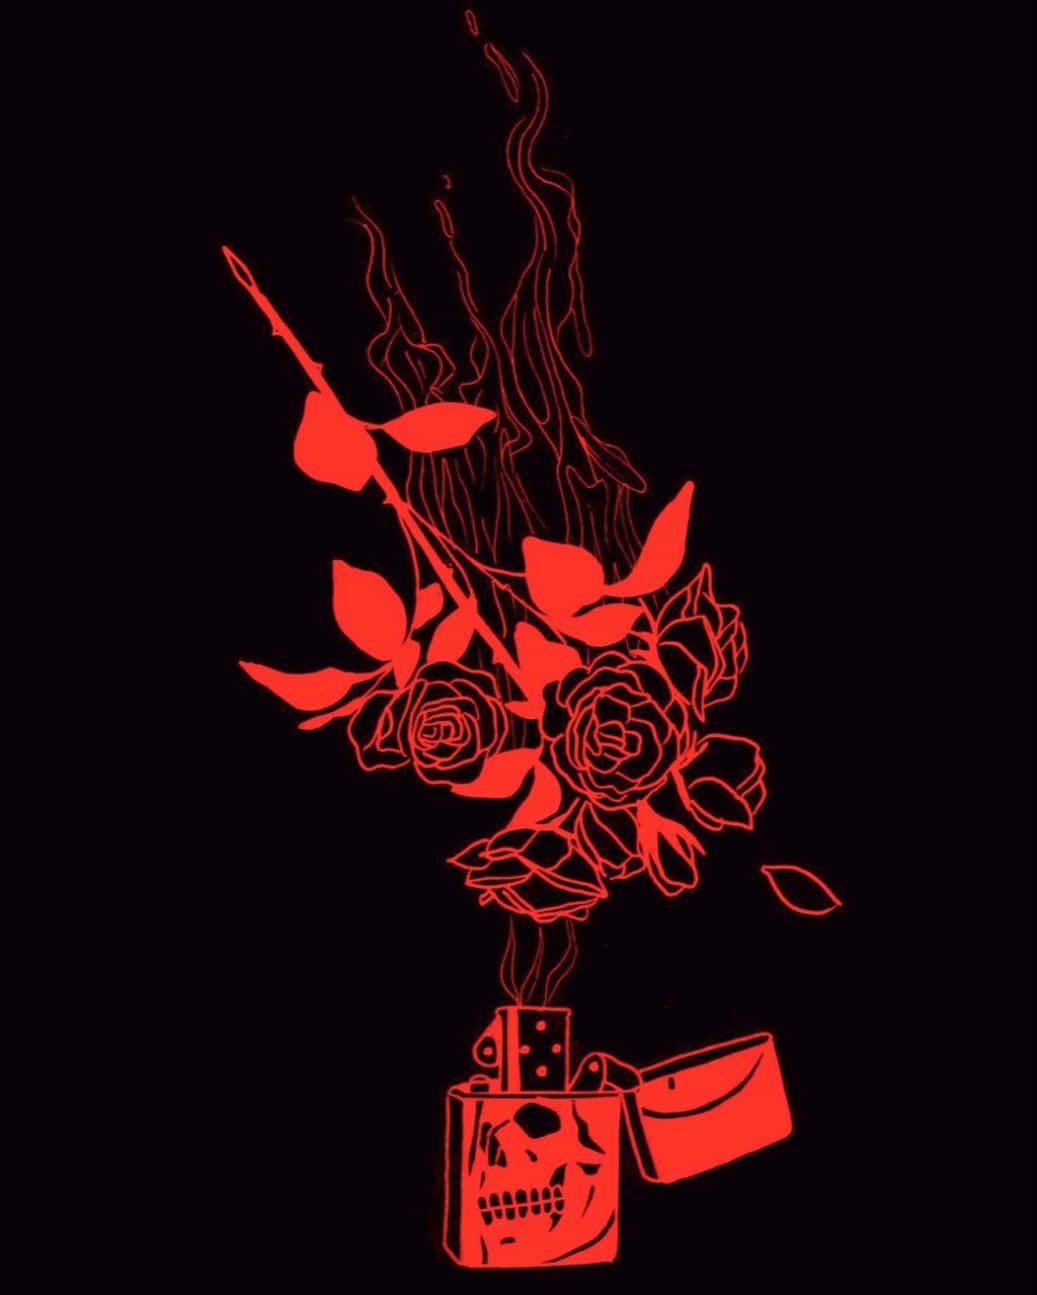 A red lighter with a skull on it is lit and smoke is coming out of it. There are roses and a branch above it. - Dark red